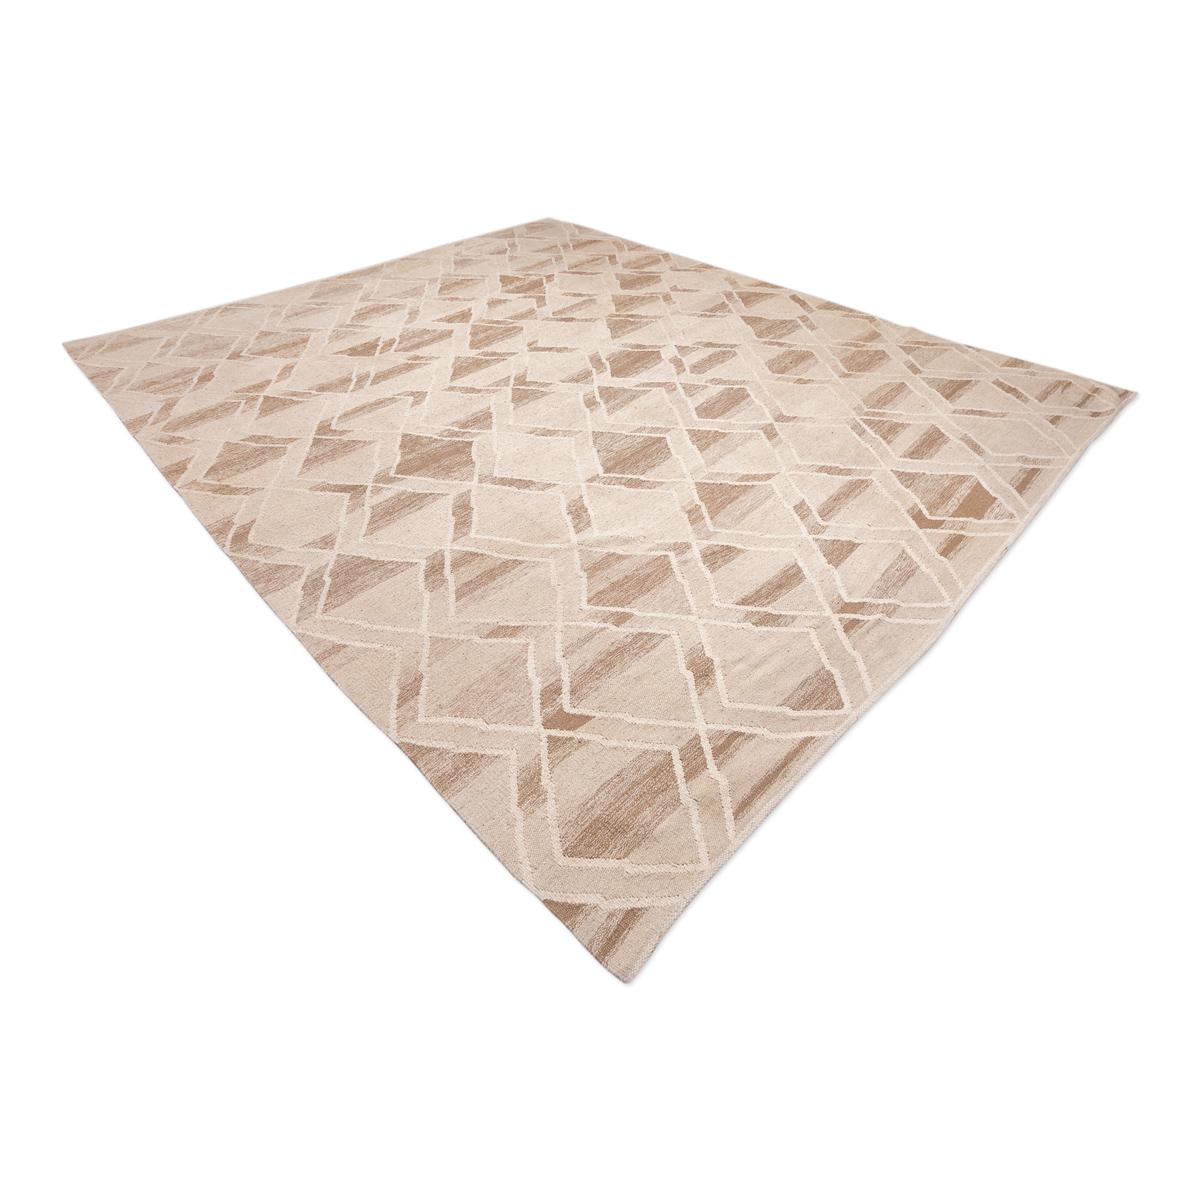 Indian Contemporary Kilim Rhombus Design Made of Wool Soft Colors